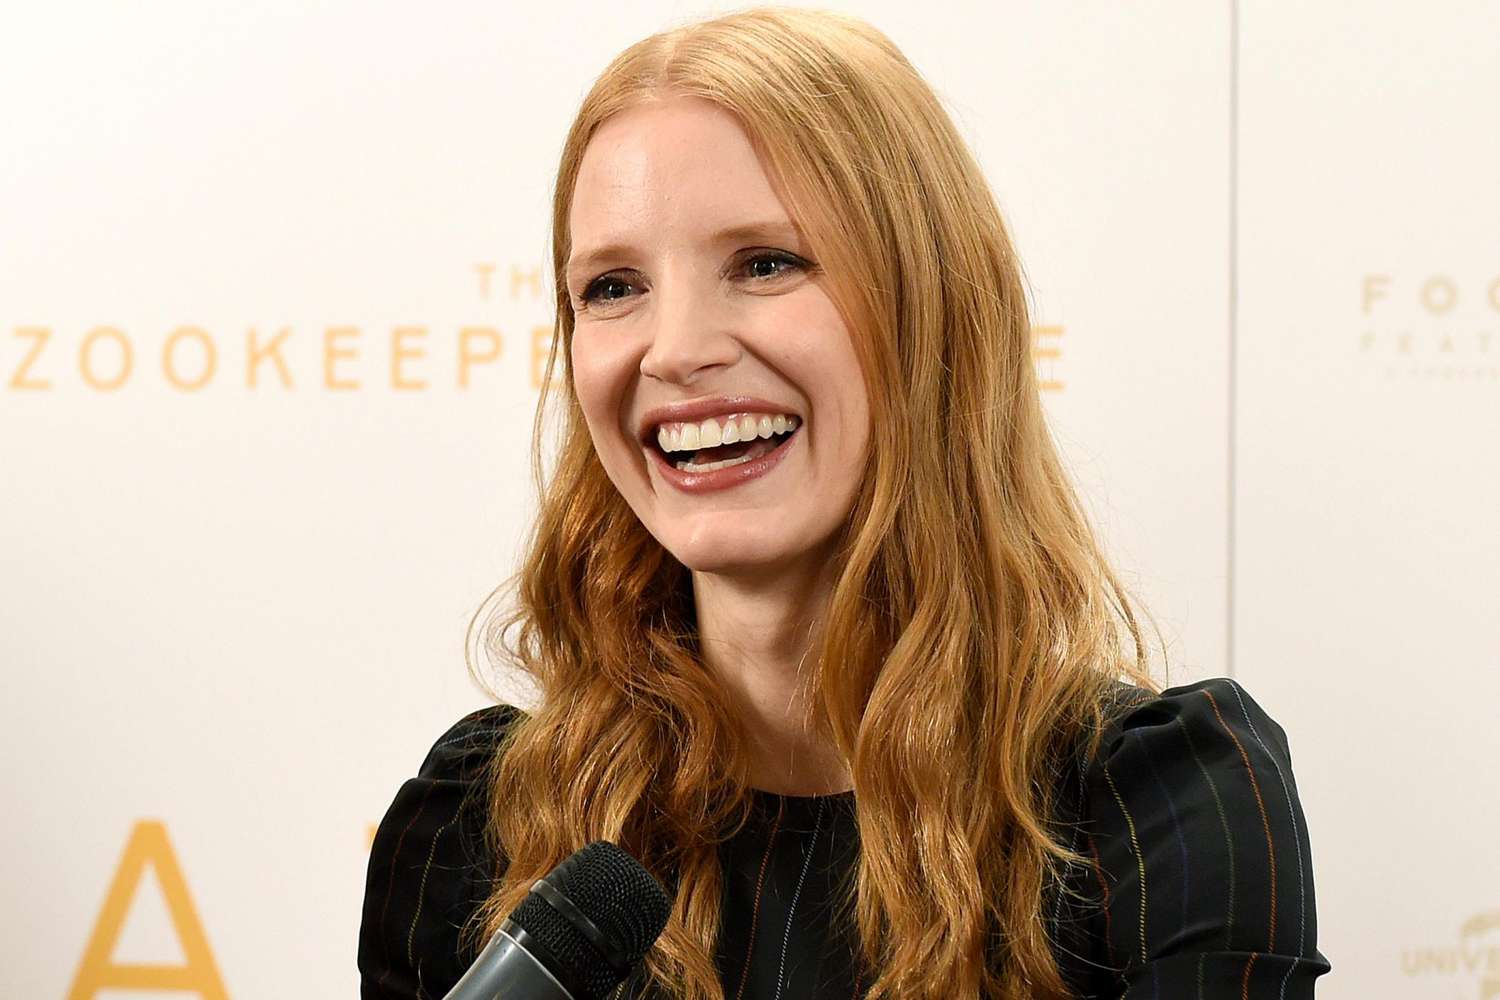 Jessica Chastain at a Press Conference for The Zookeeper's Wife&nbsp;in Warsaw on March 7, 2017